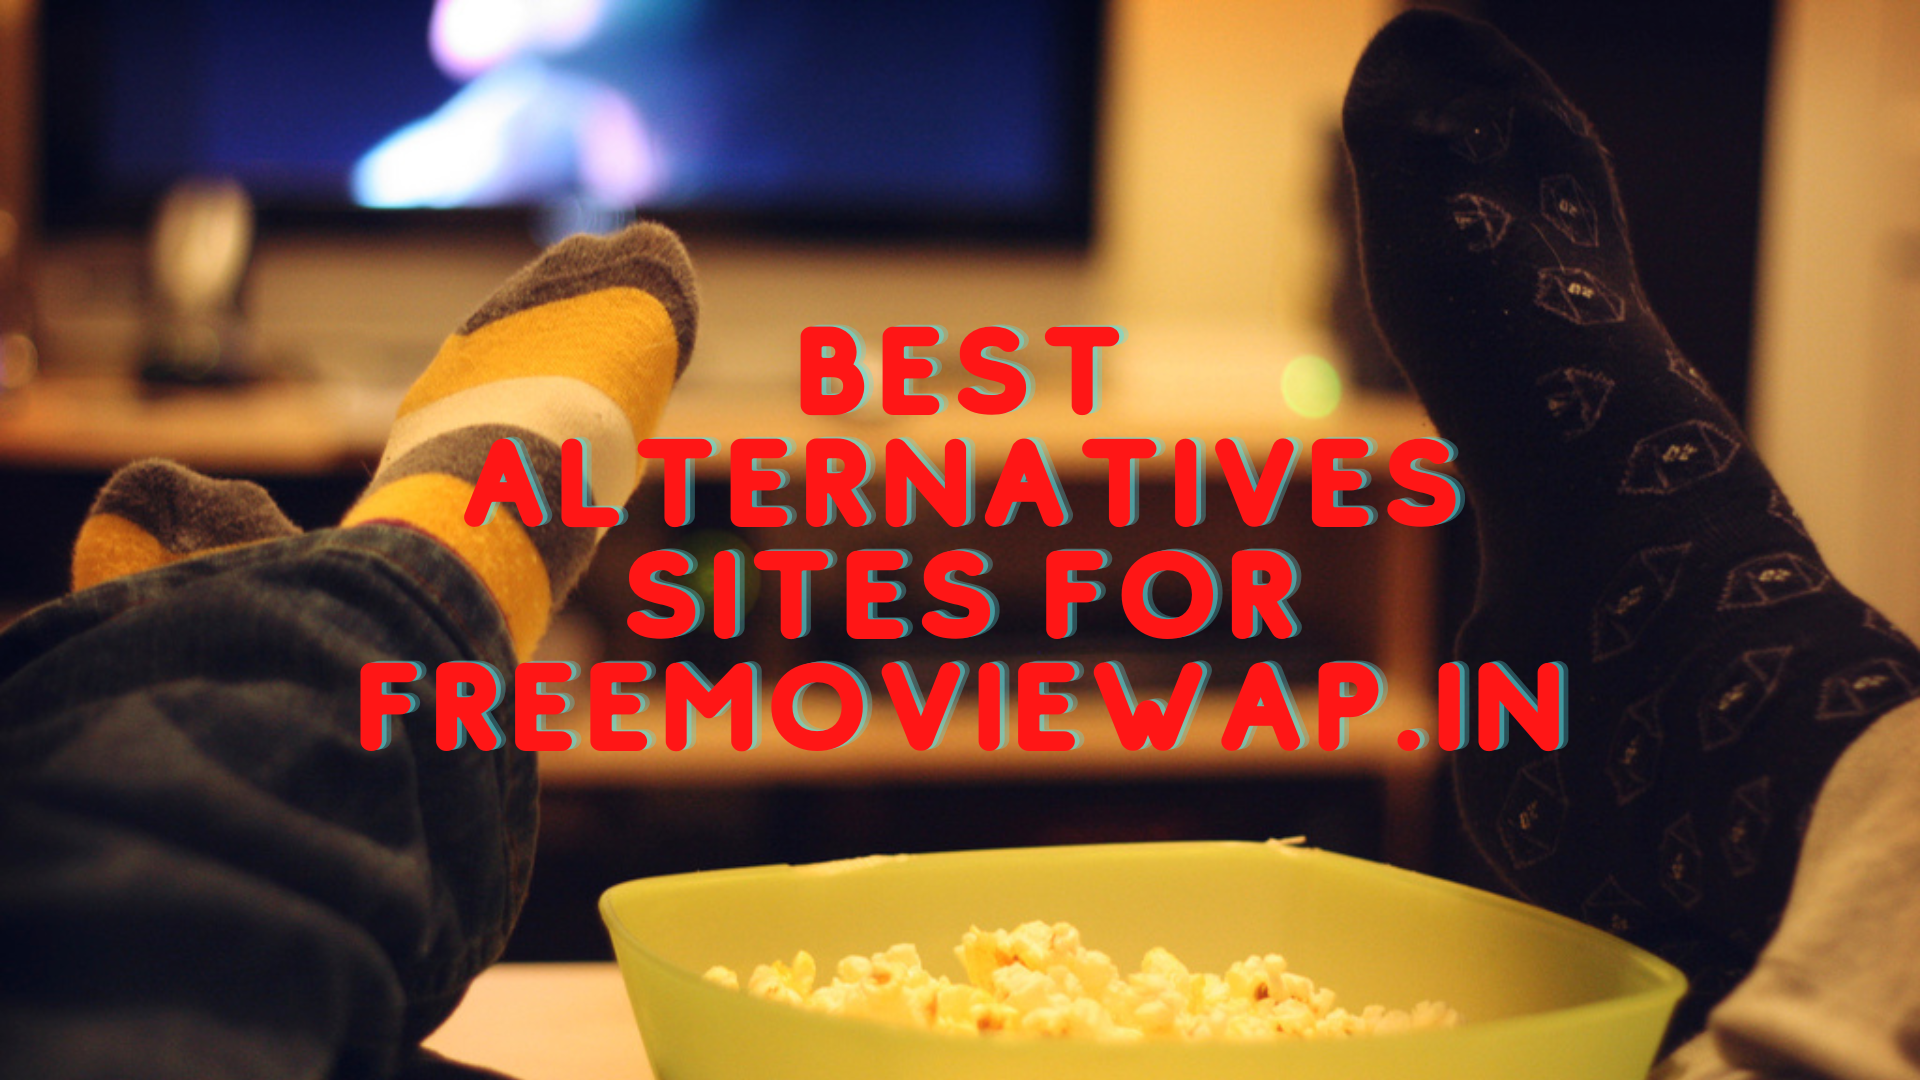 Two feets on the table with a bowl of popcorn and words Best Alternatives Sites For Freemoviewap.in